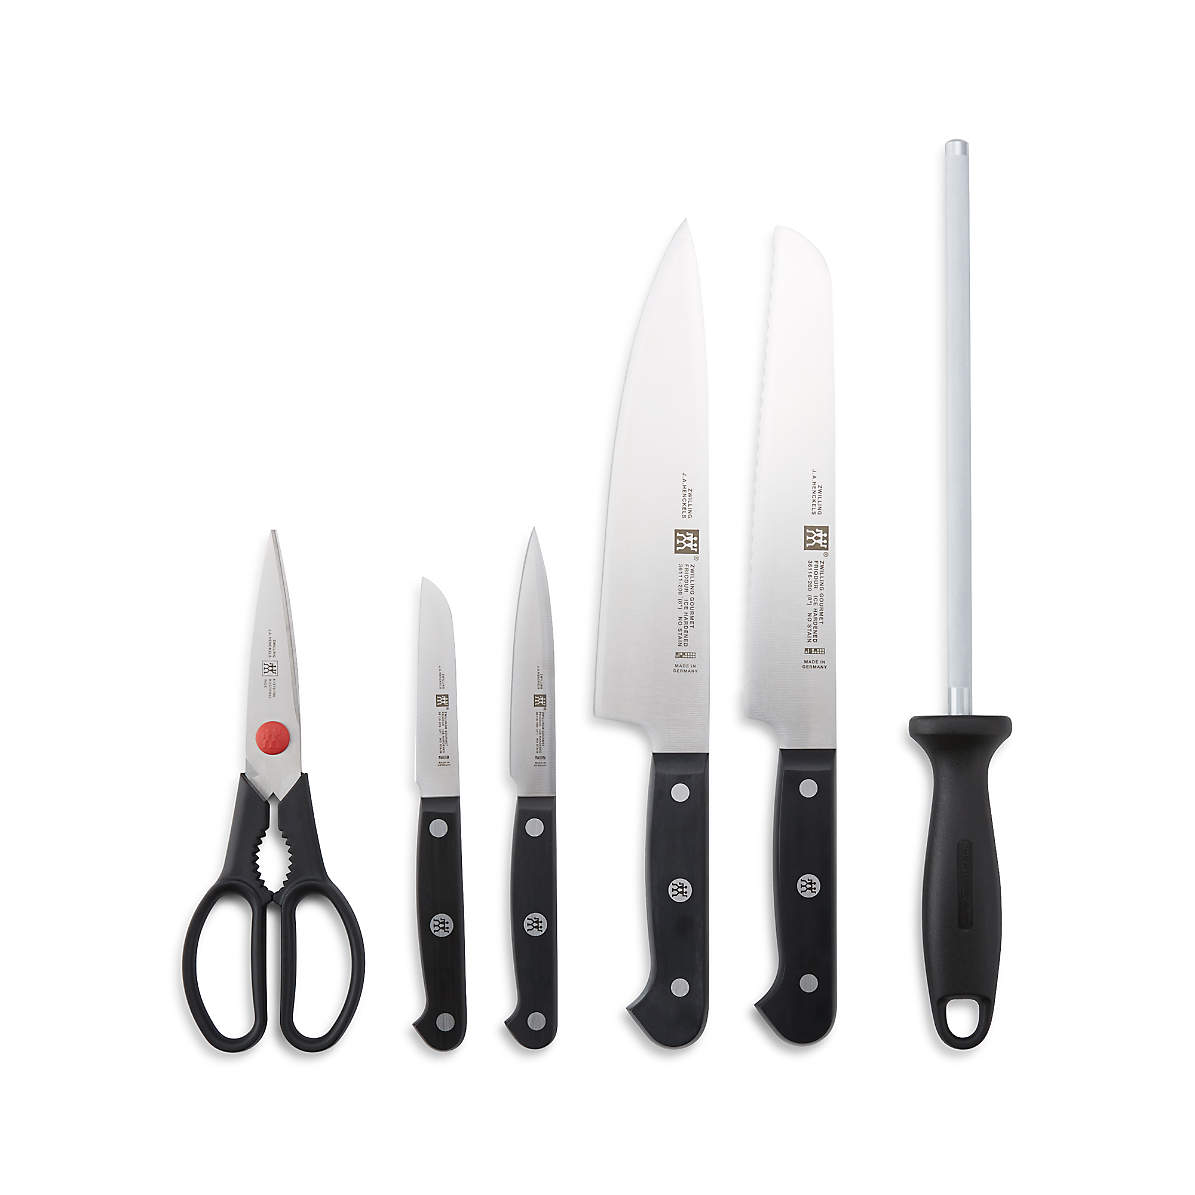  ZWILLING J.A. Henckels Zwilling gourmet 7-pc knife block set,  3.15 Pound : Home & Kitchen